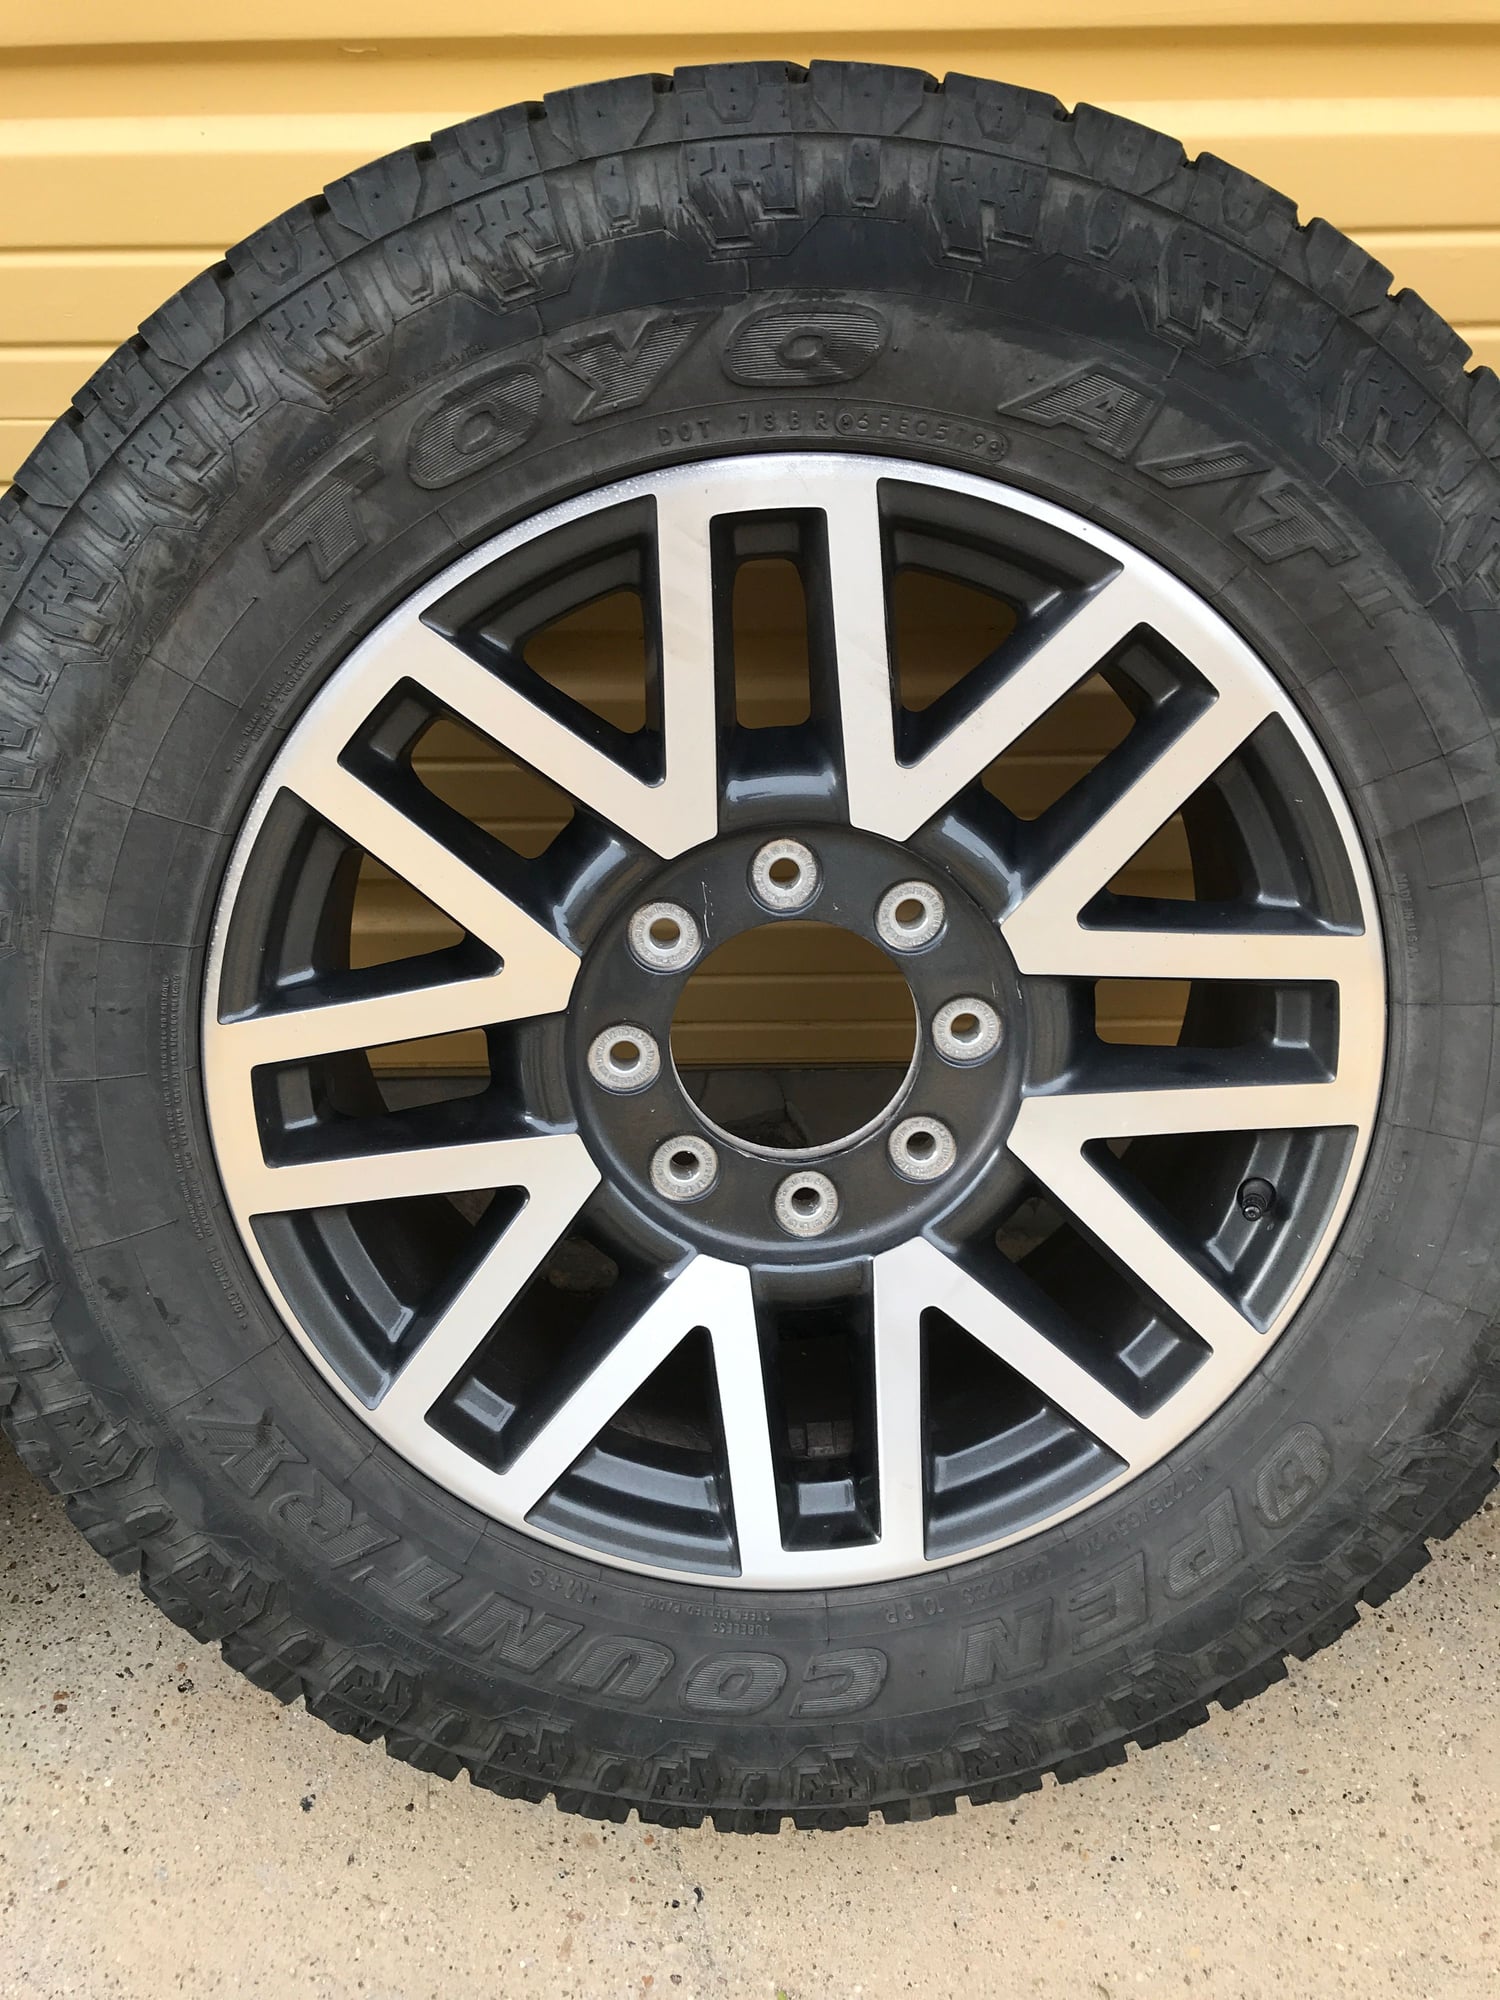 Wheels and Tires/Axles - 2017 F250 Lariat 20s - Used - 2017 to 2020 Ford F-250 Super Duty - Dallas, TX 75206, United States